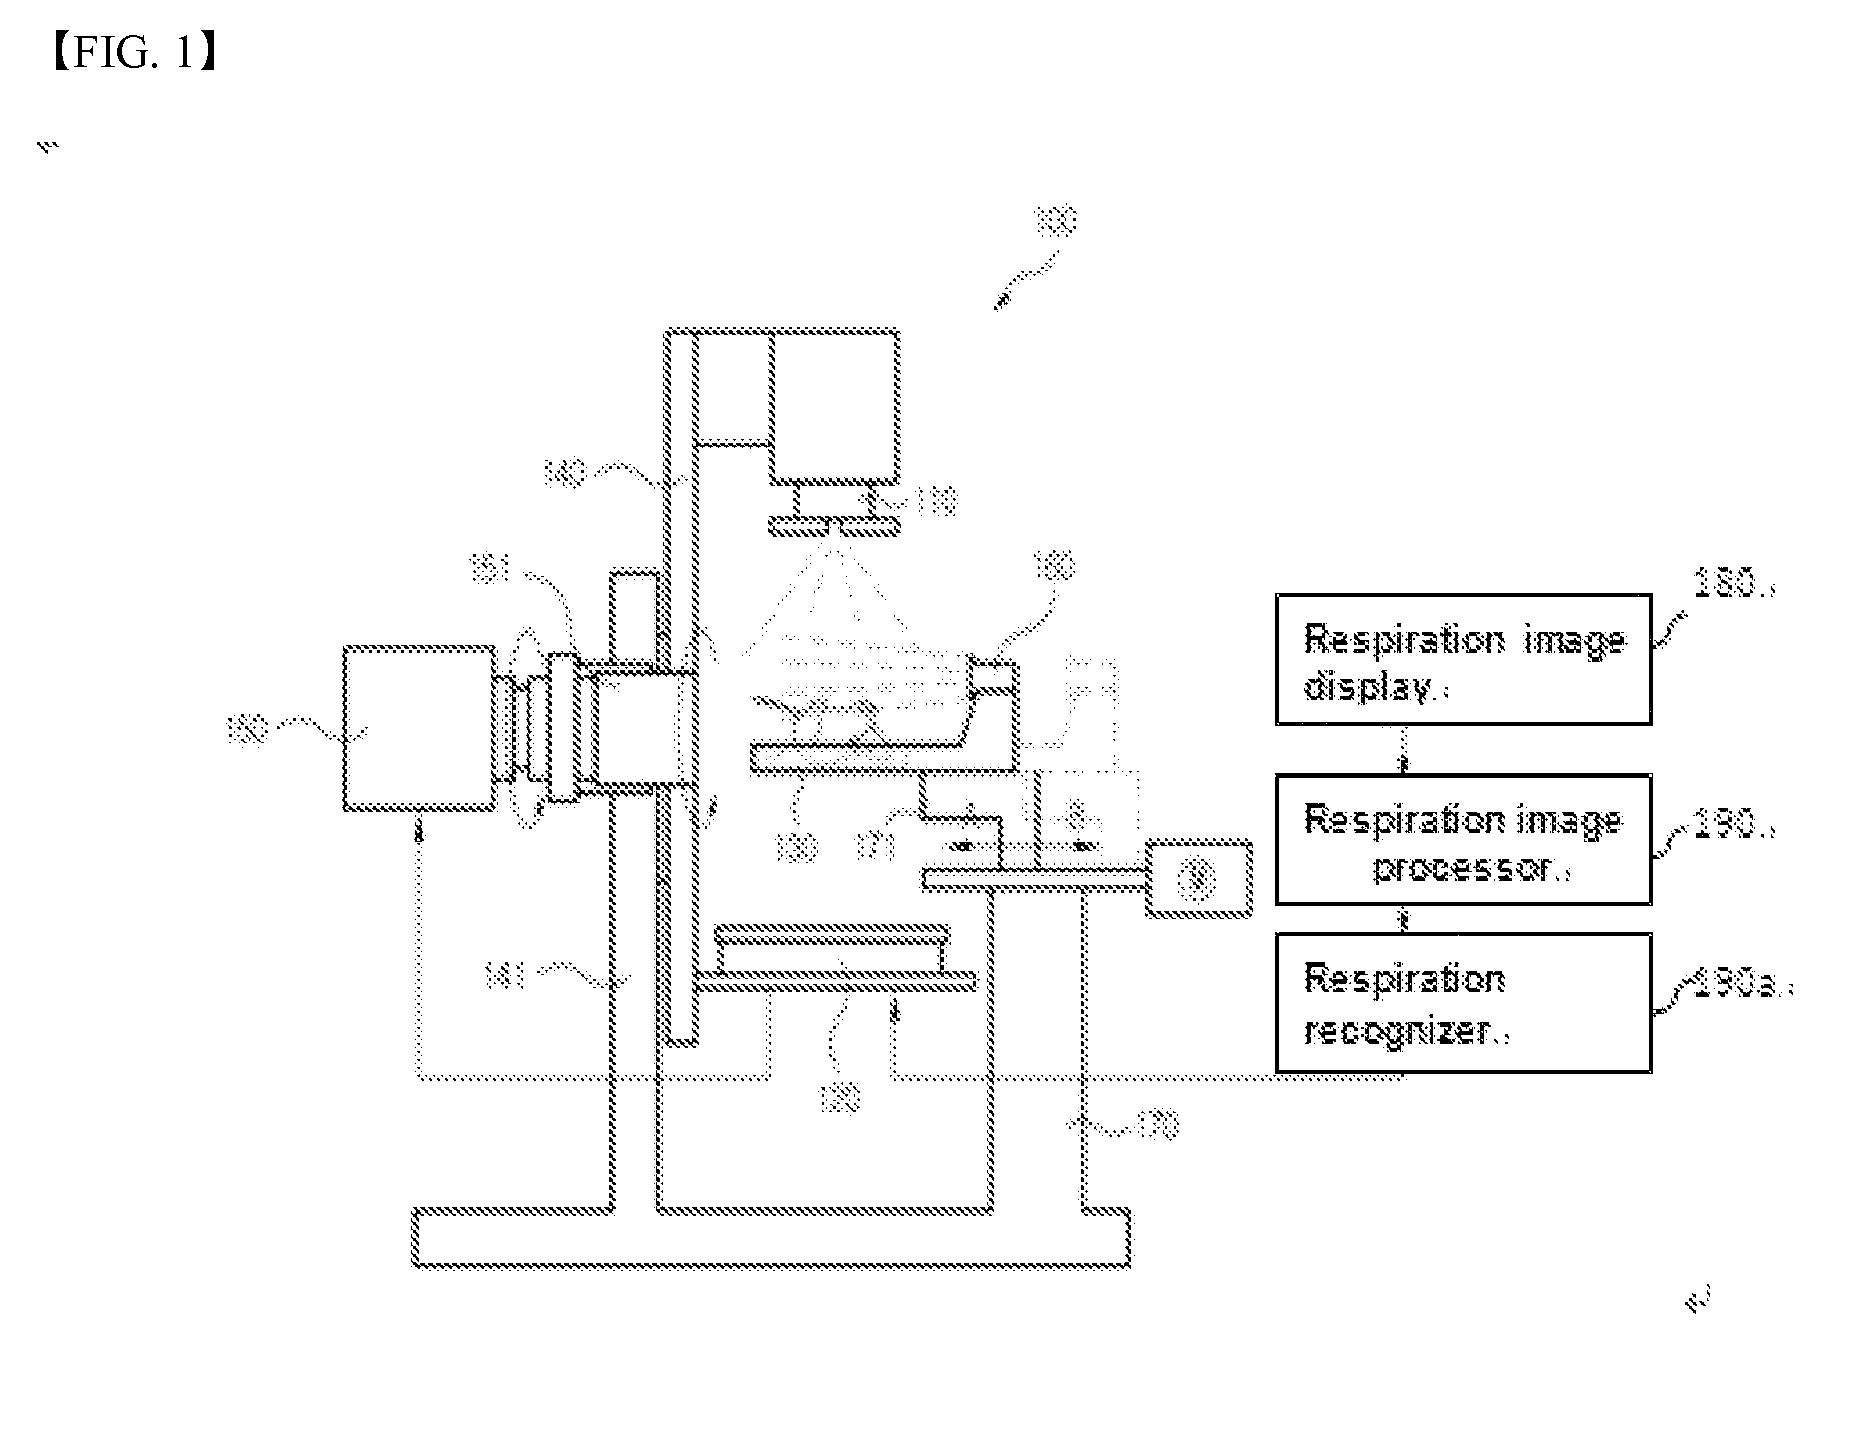 Method for generating a respiratory gating signal in an x-ray micrography scanner